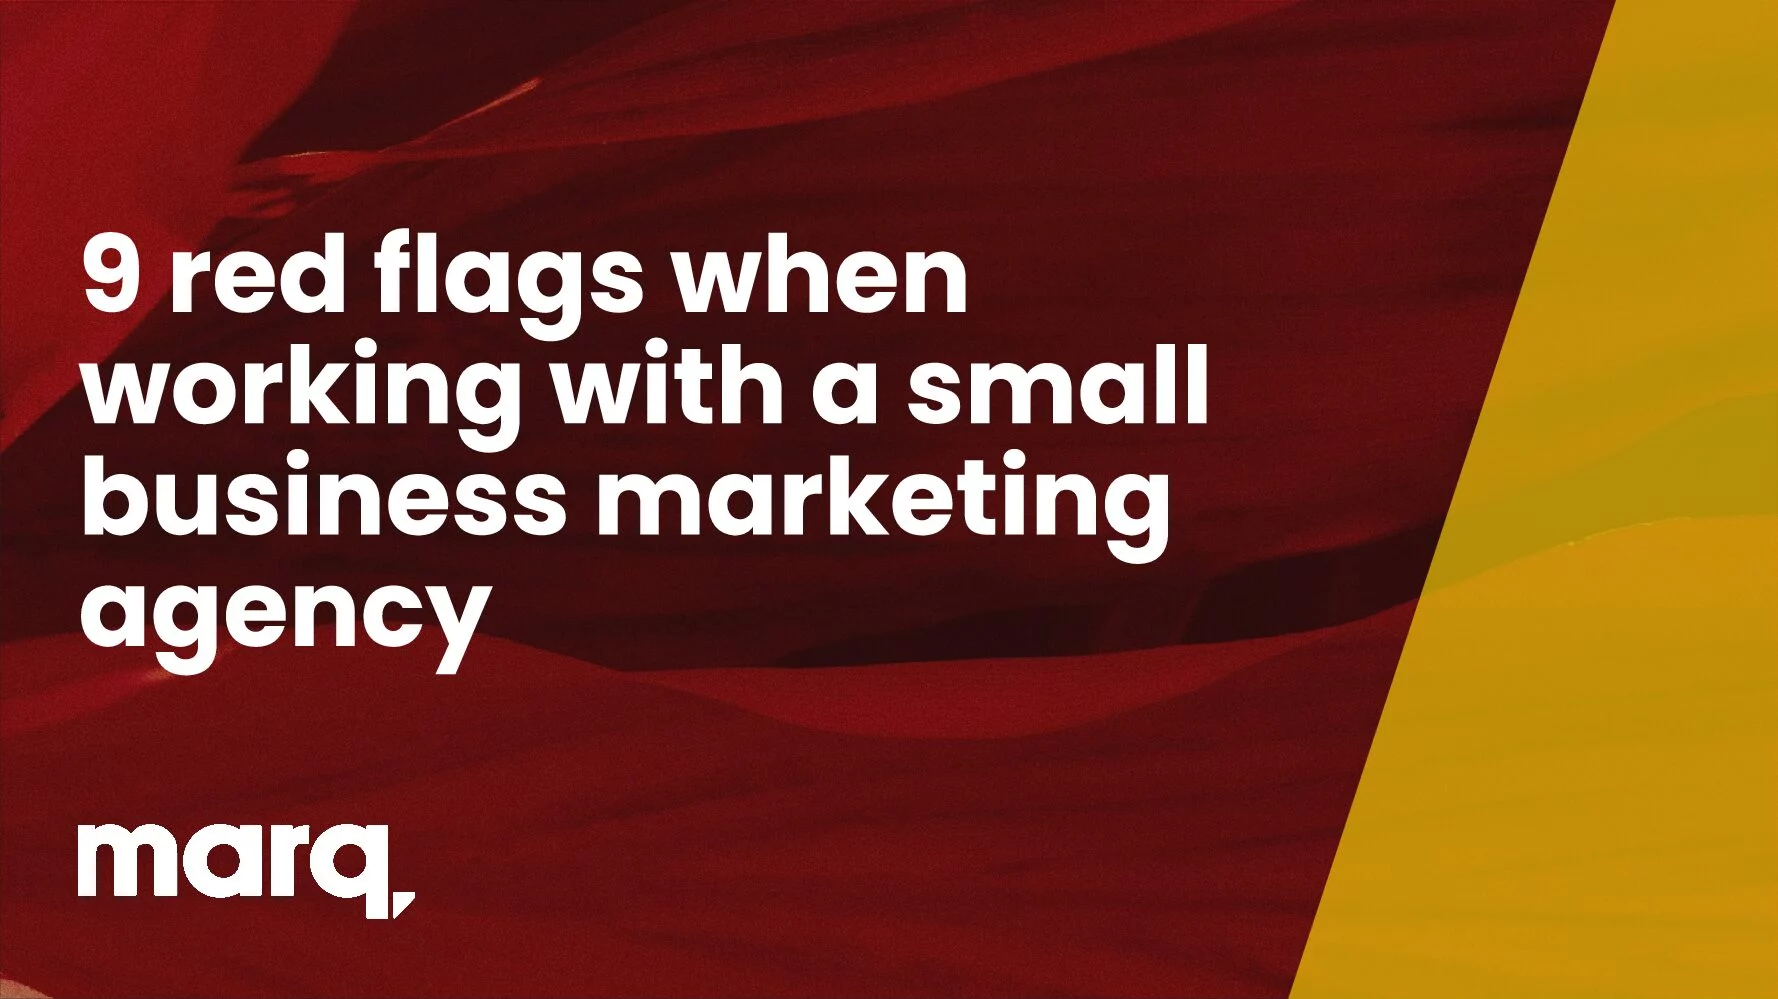 9 red flags when working with a small business marketing agency